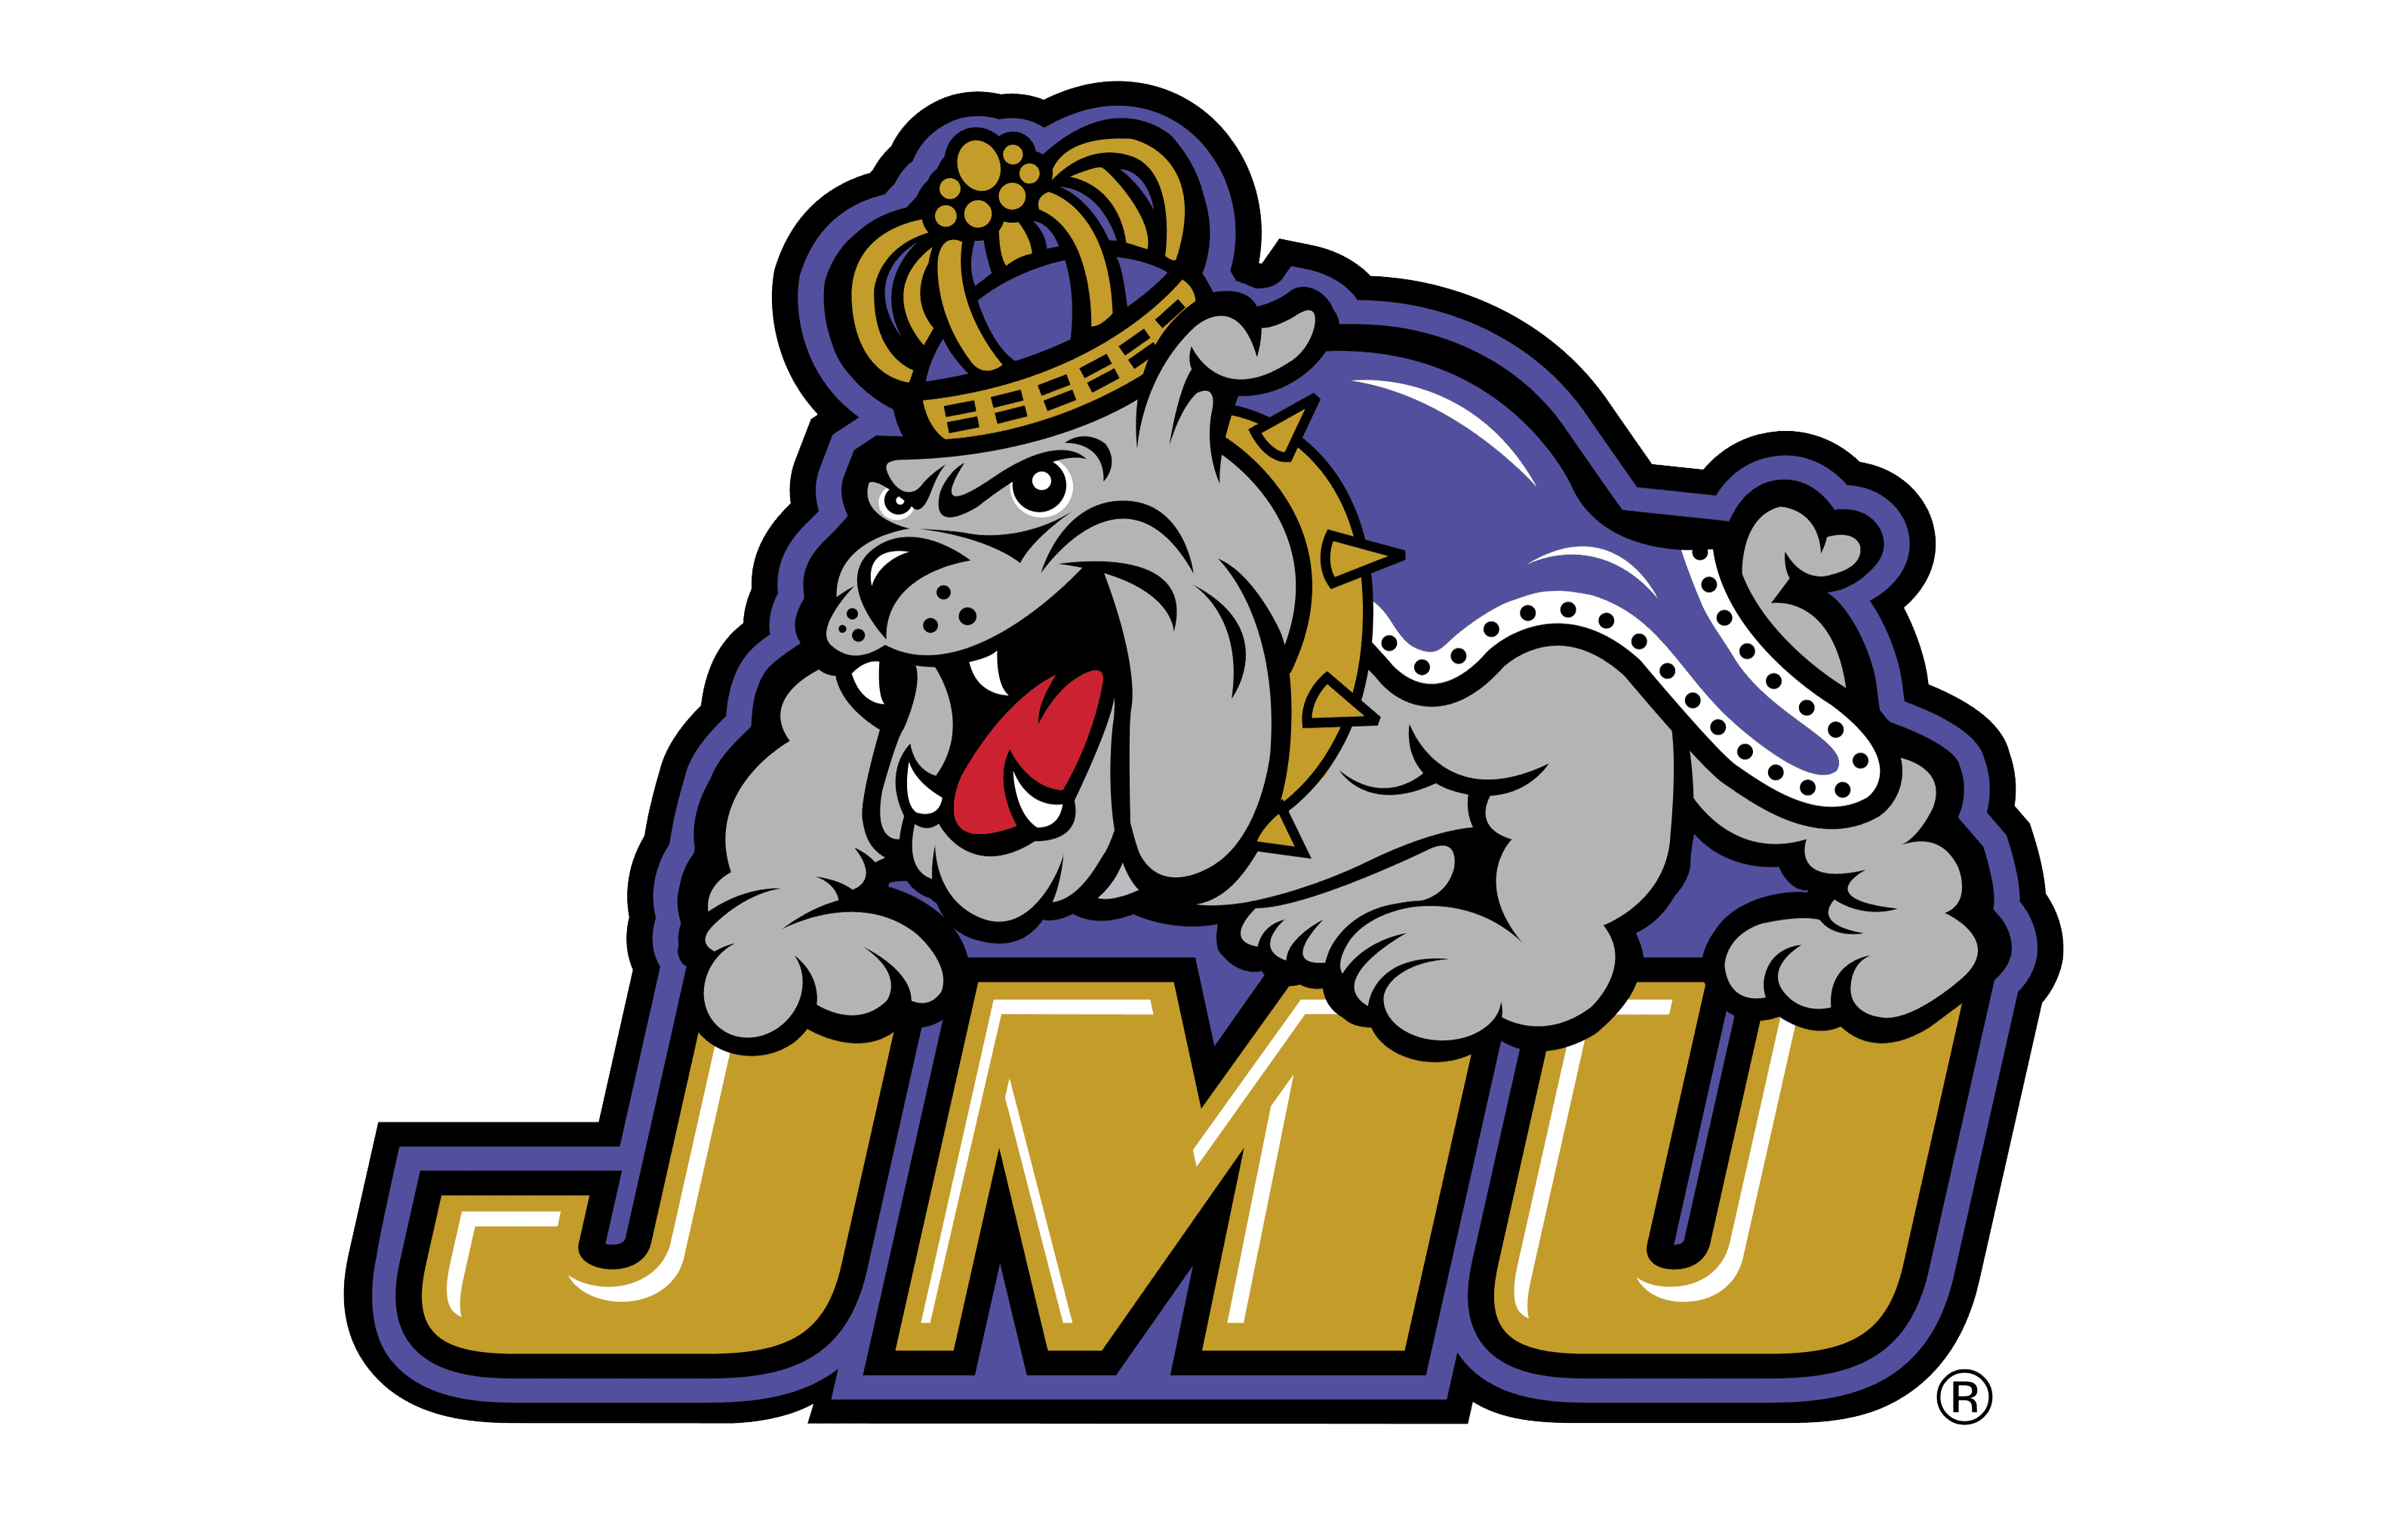 James Madison Dukes logo and symbol, meaning, history, PNG